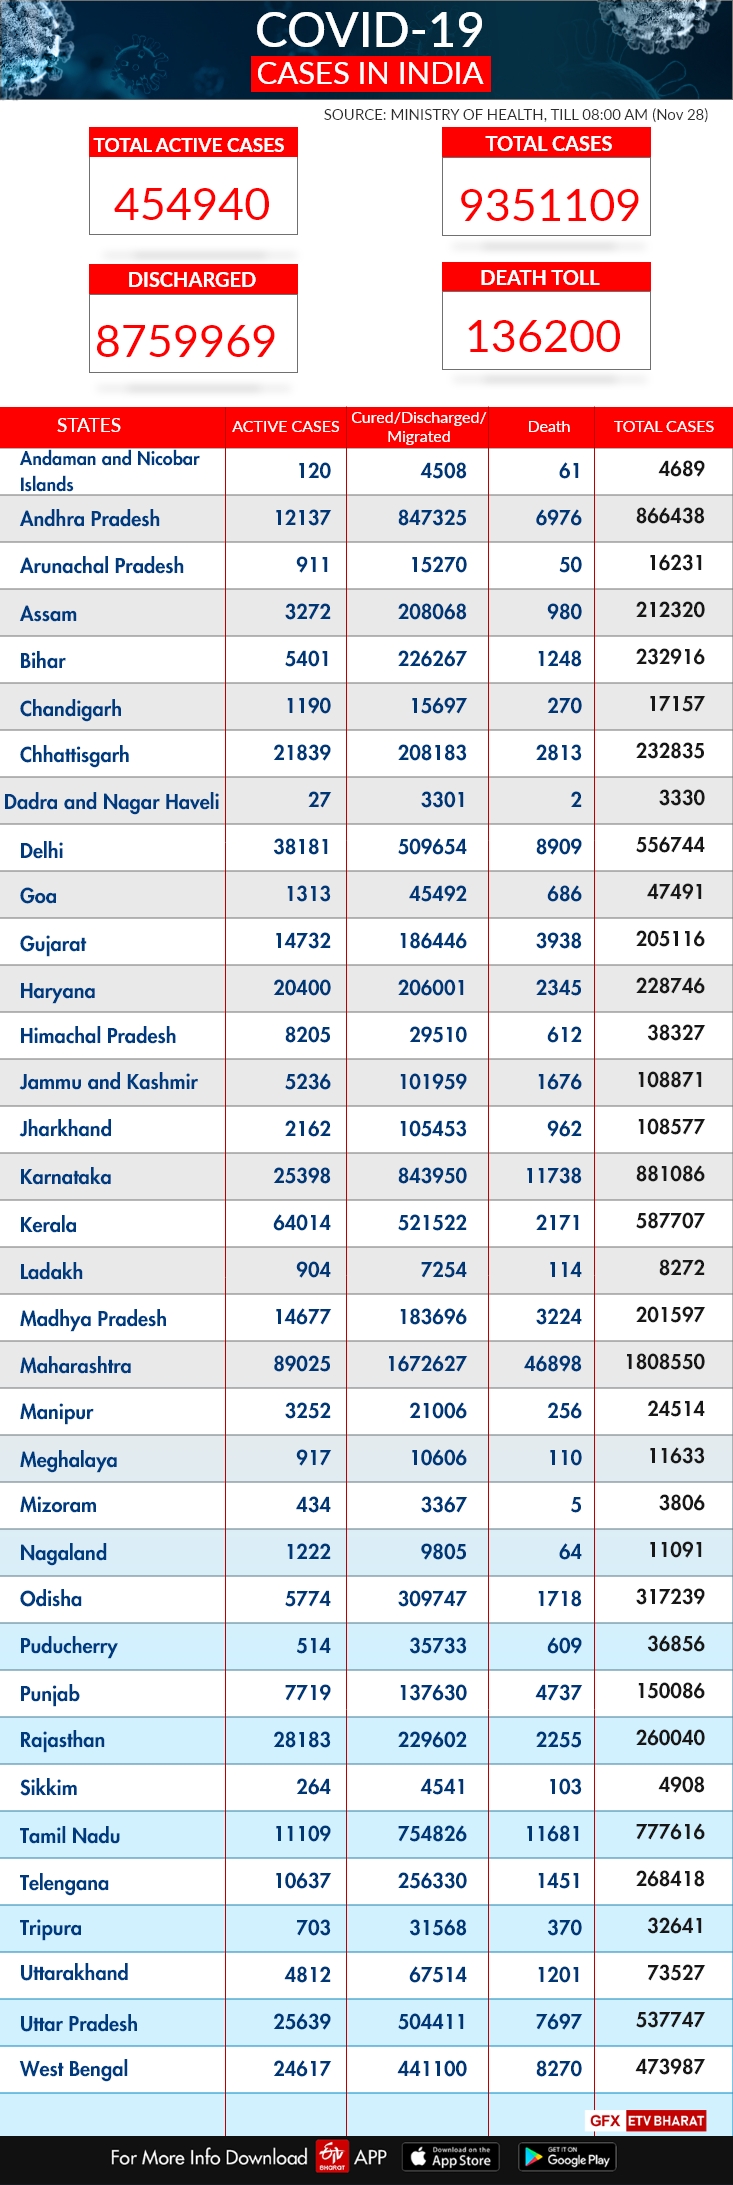 India's COVID-19 cases climbed to 93.51 lakh with 41,322 new infections being reported in a day